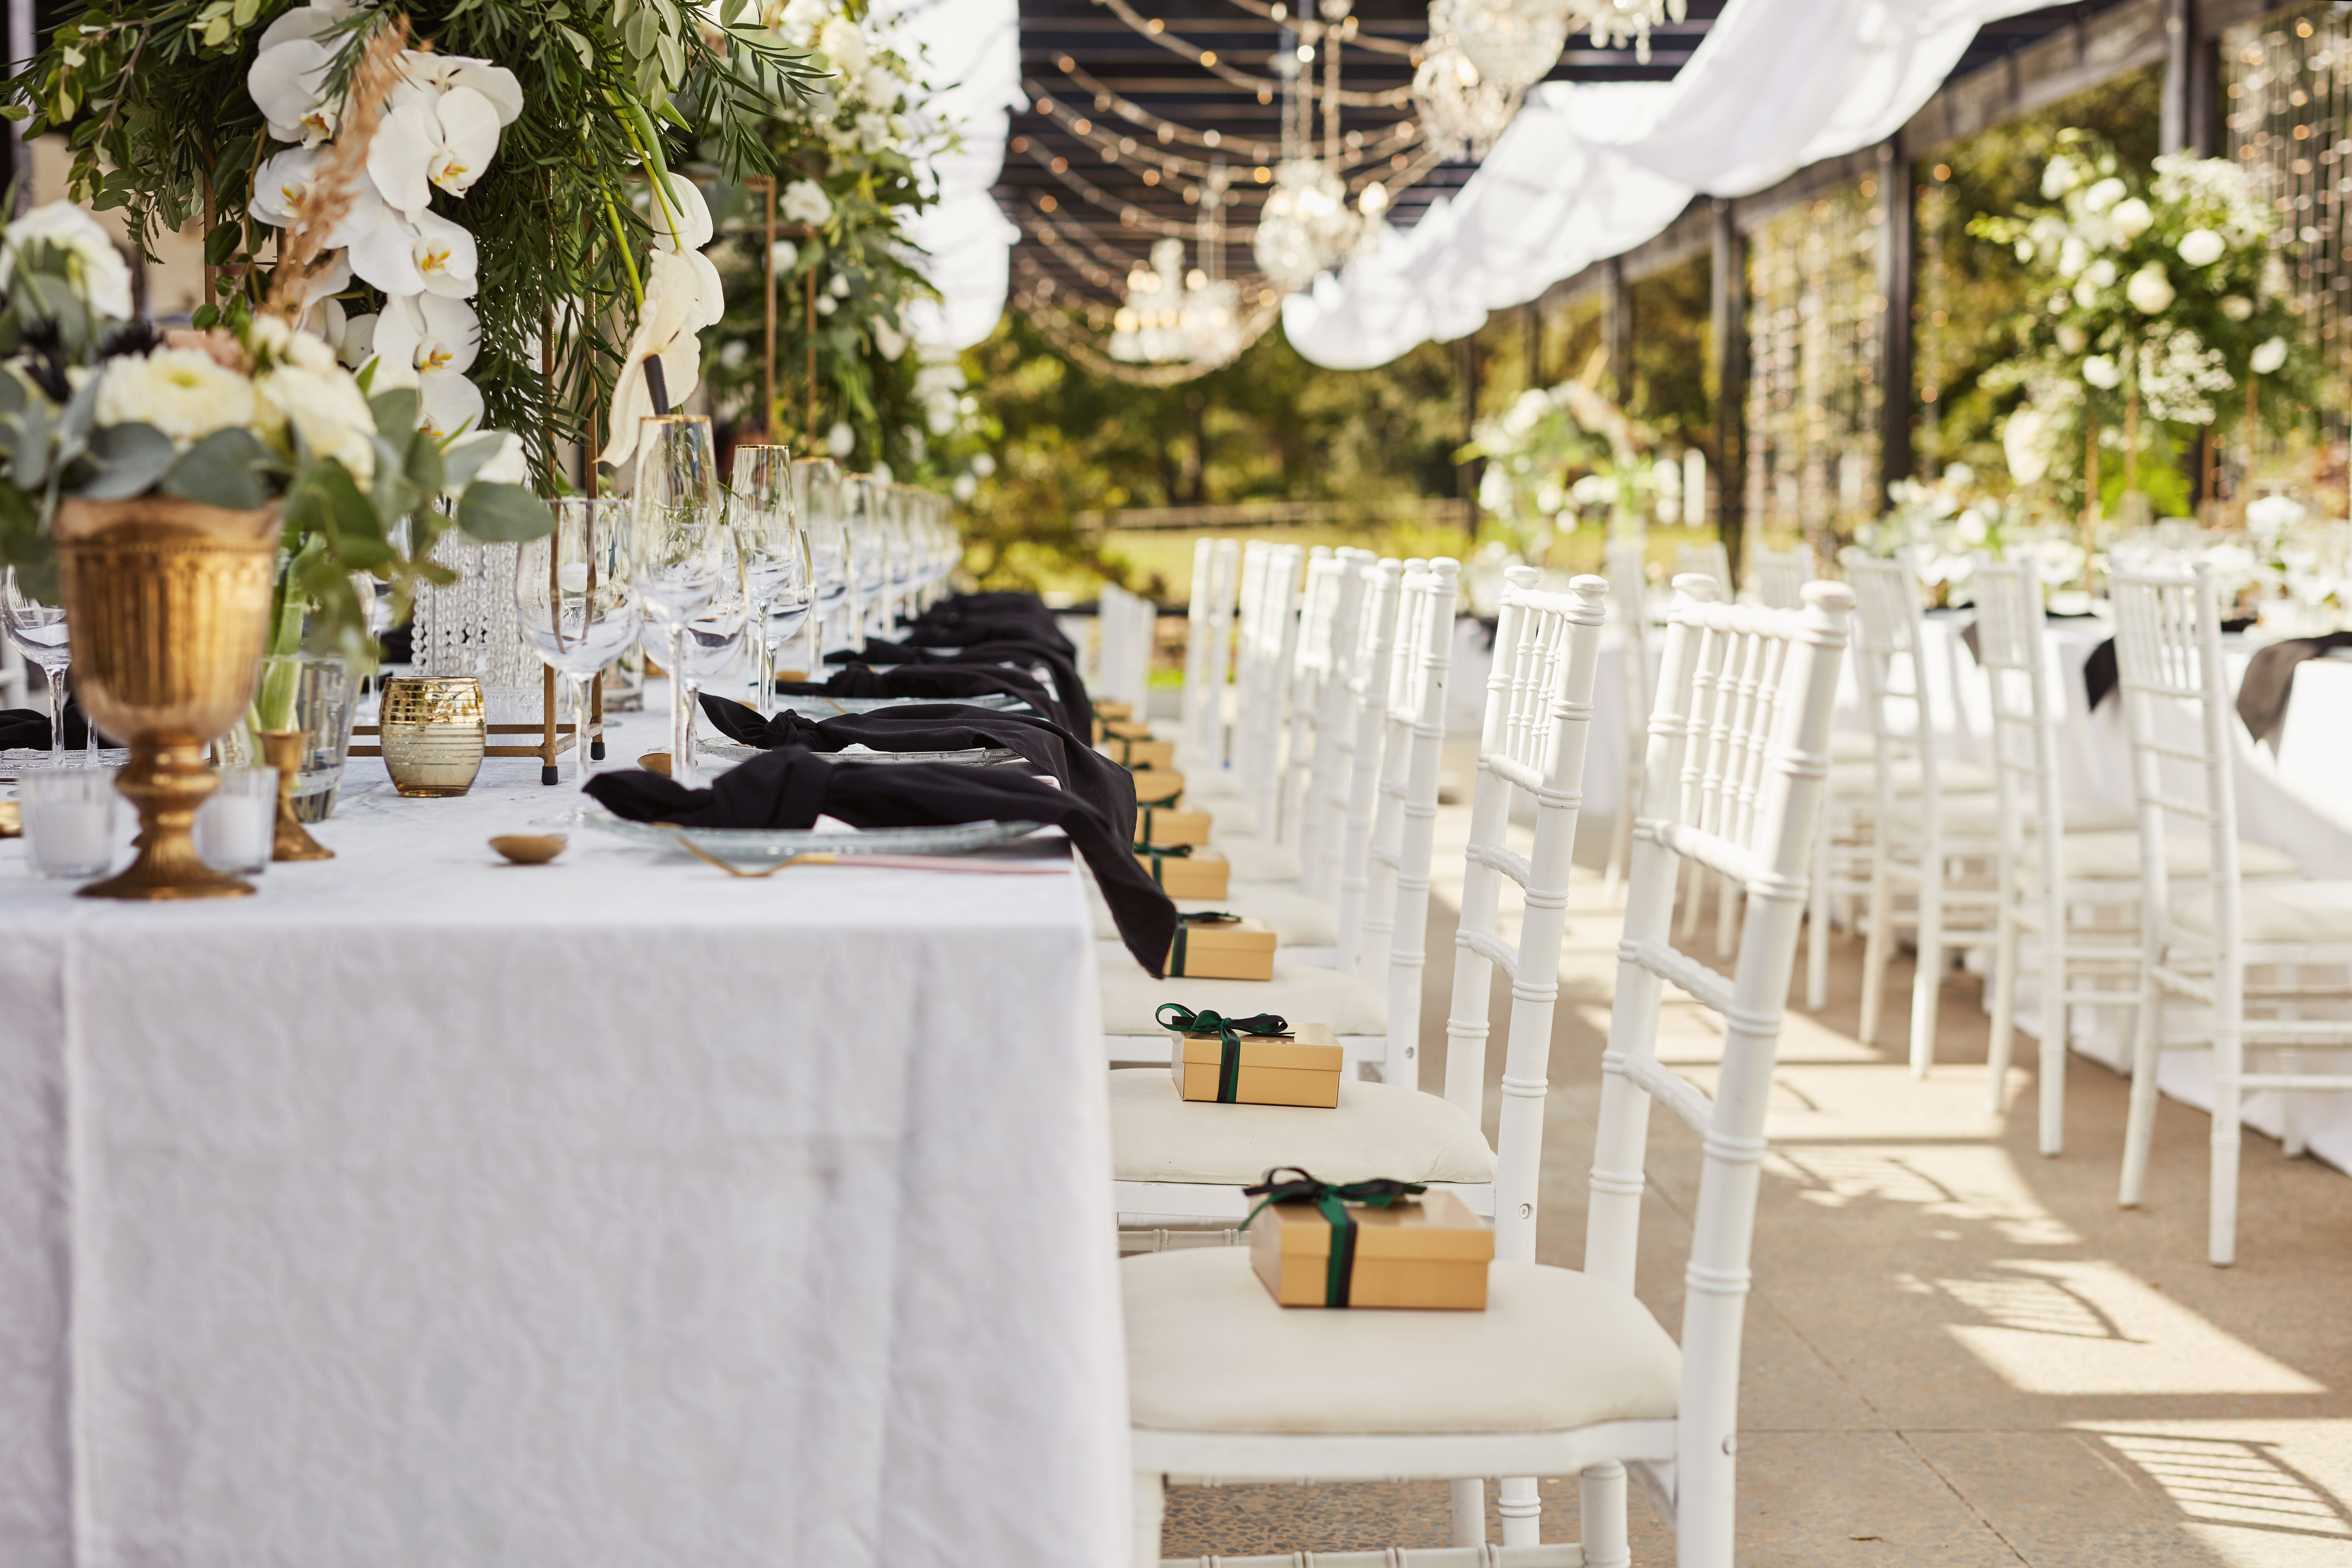 A wedding reception with lush green centerpieces, gold accents, white chairs, and small boxes with black ribbon as guest favors